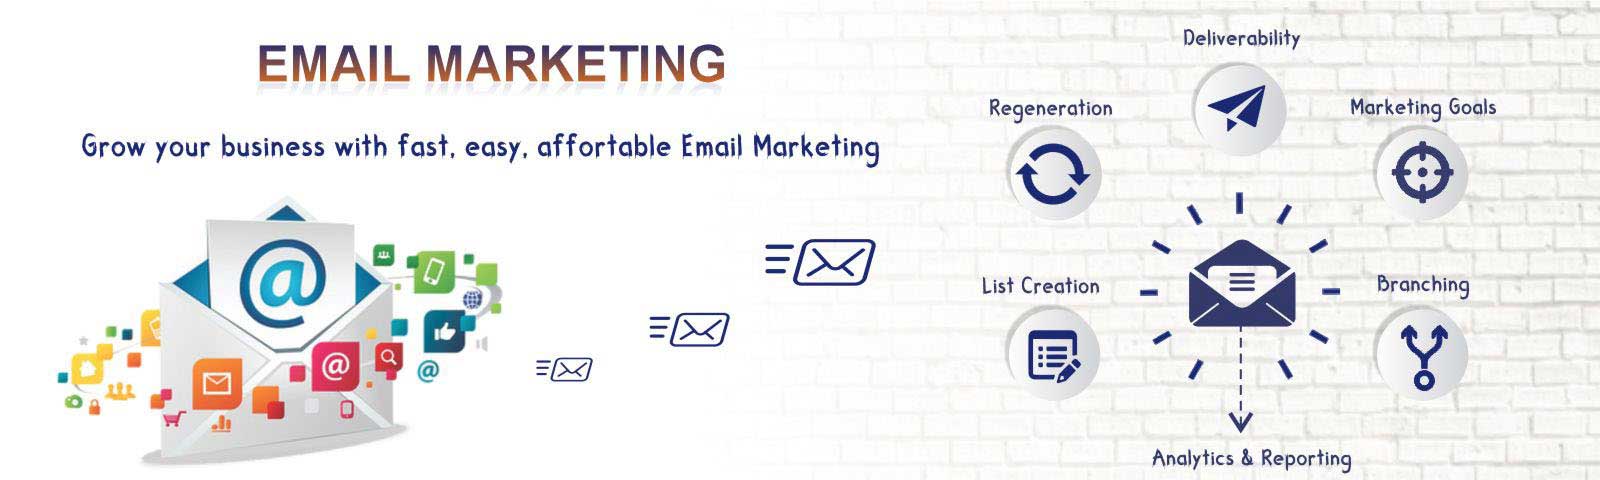 Email Marketting